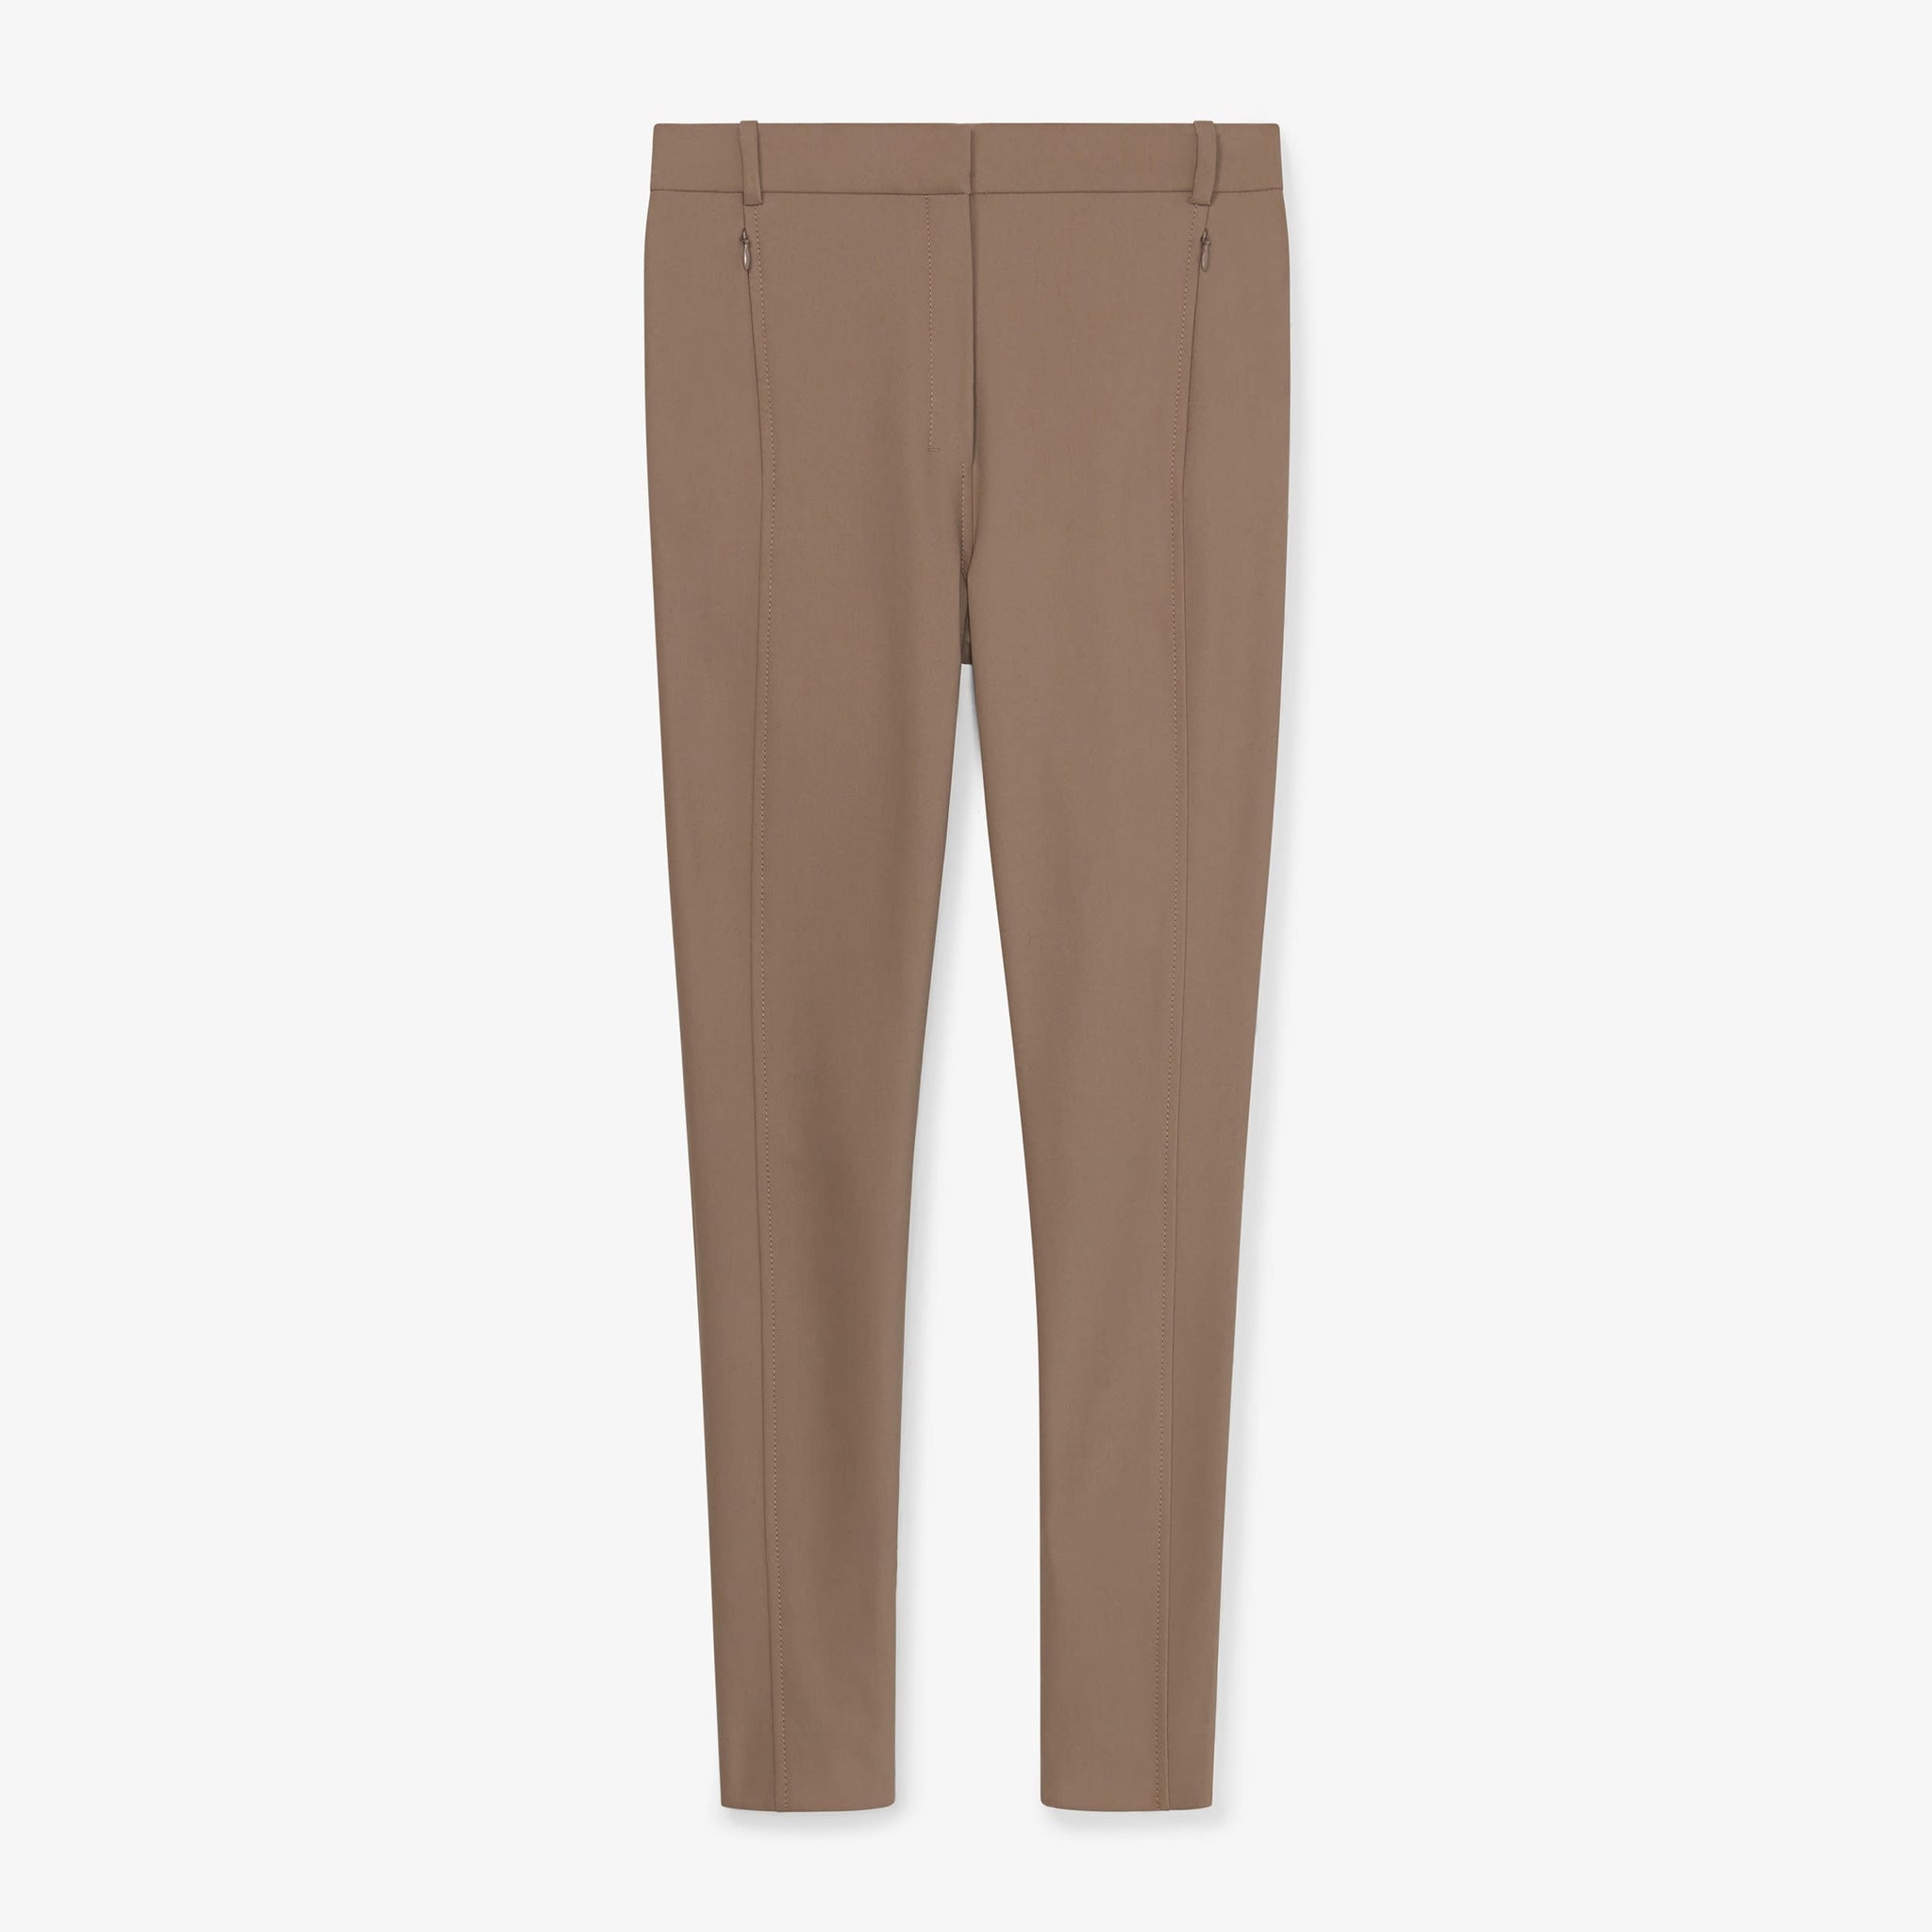 Packshot image of the curie pant in russet